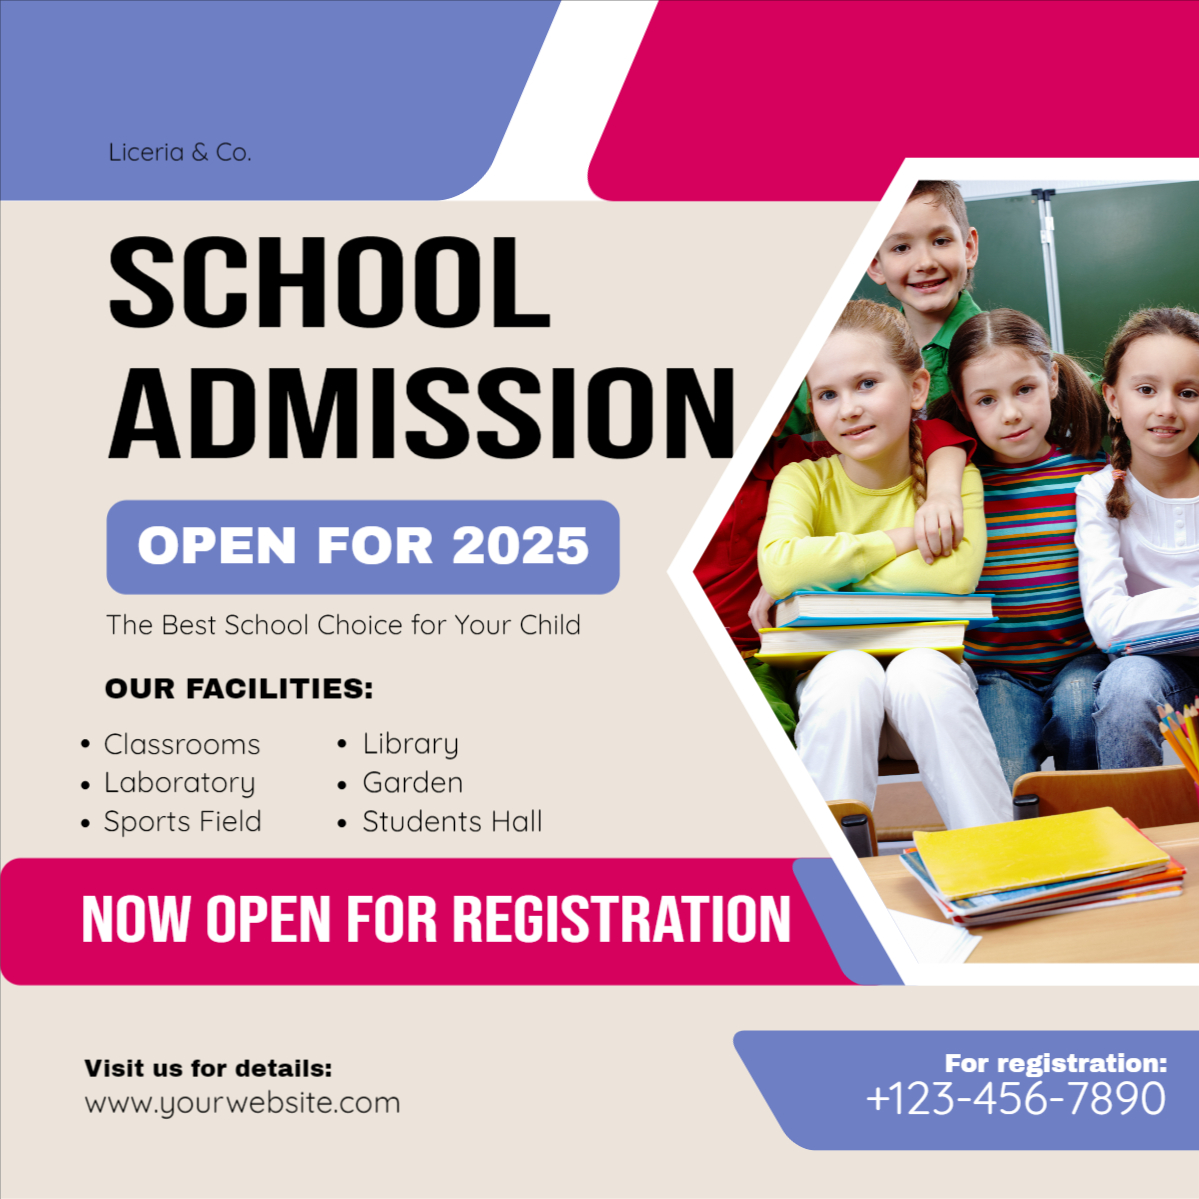 School Admission open poster design download for free